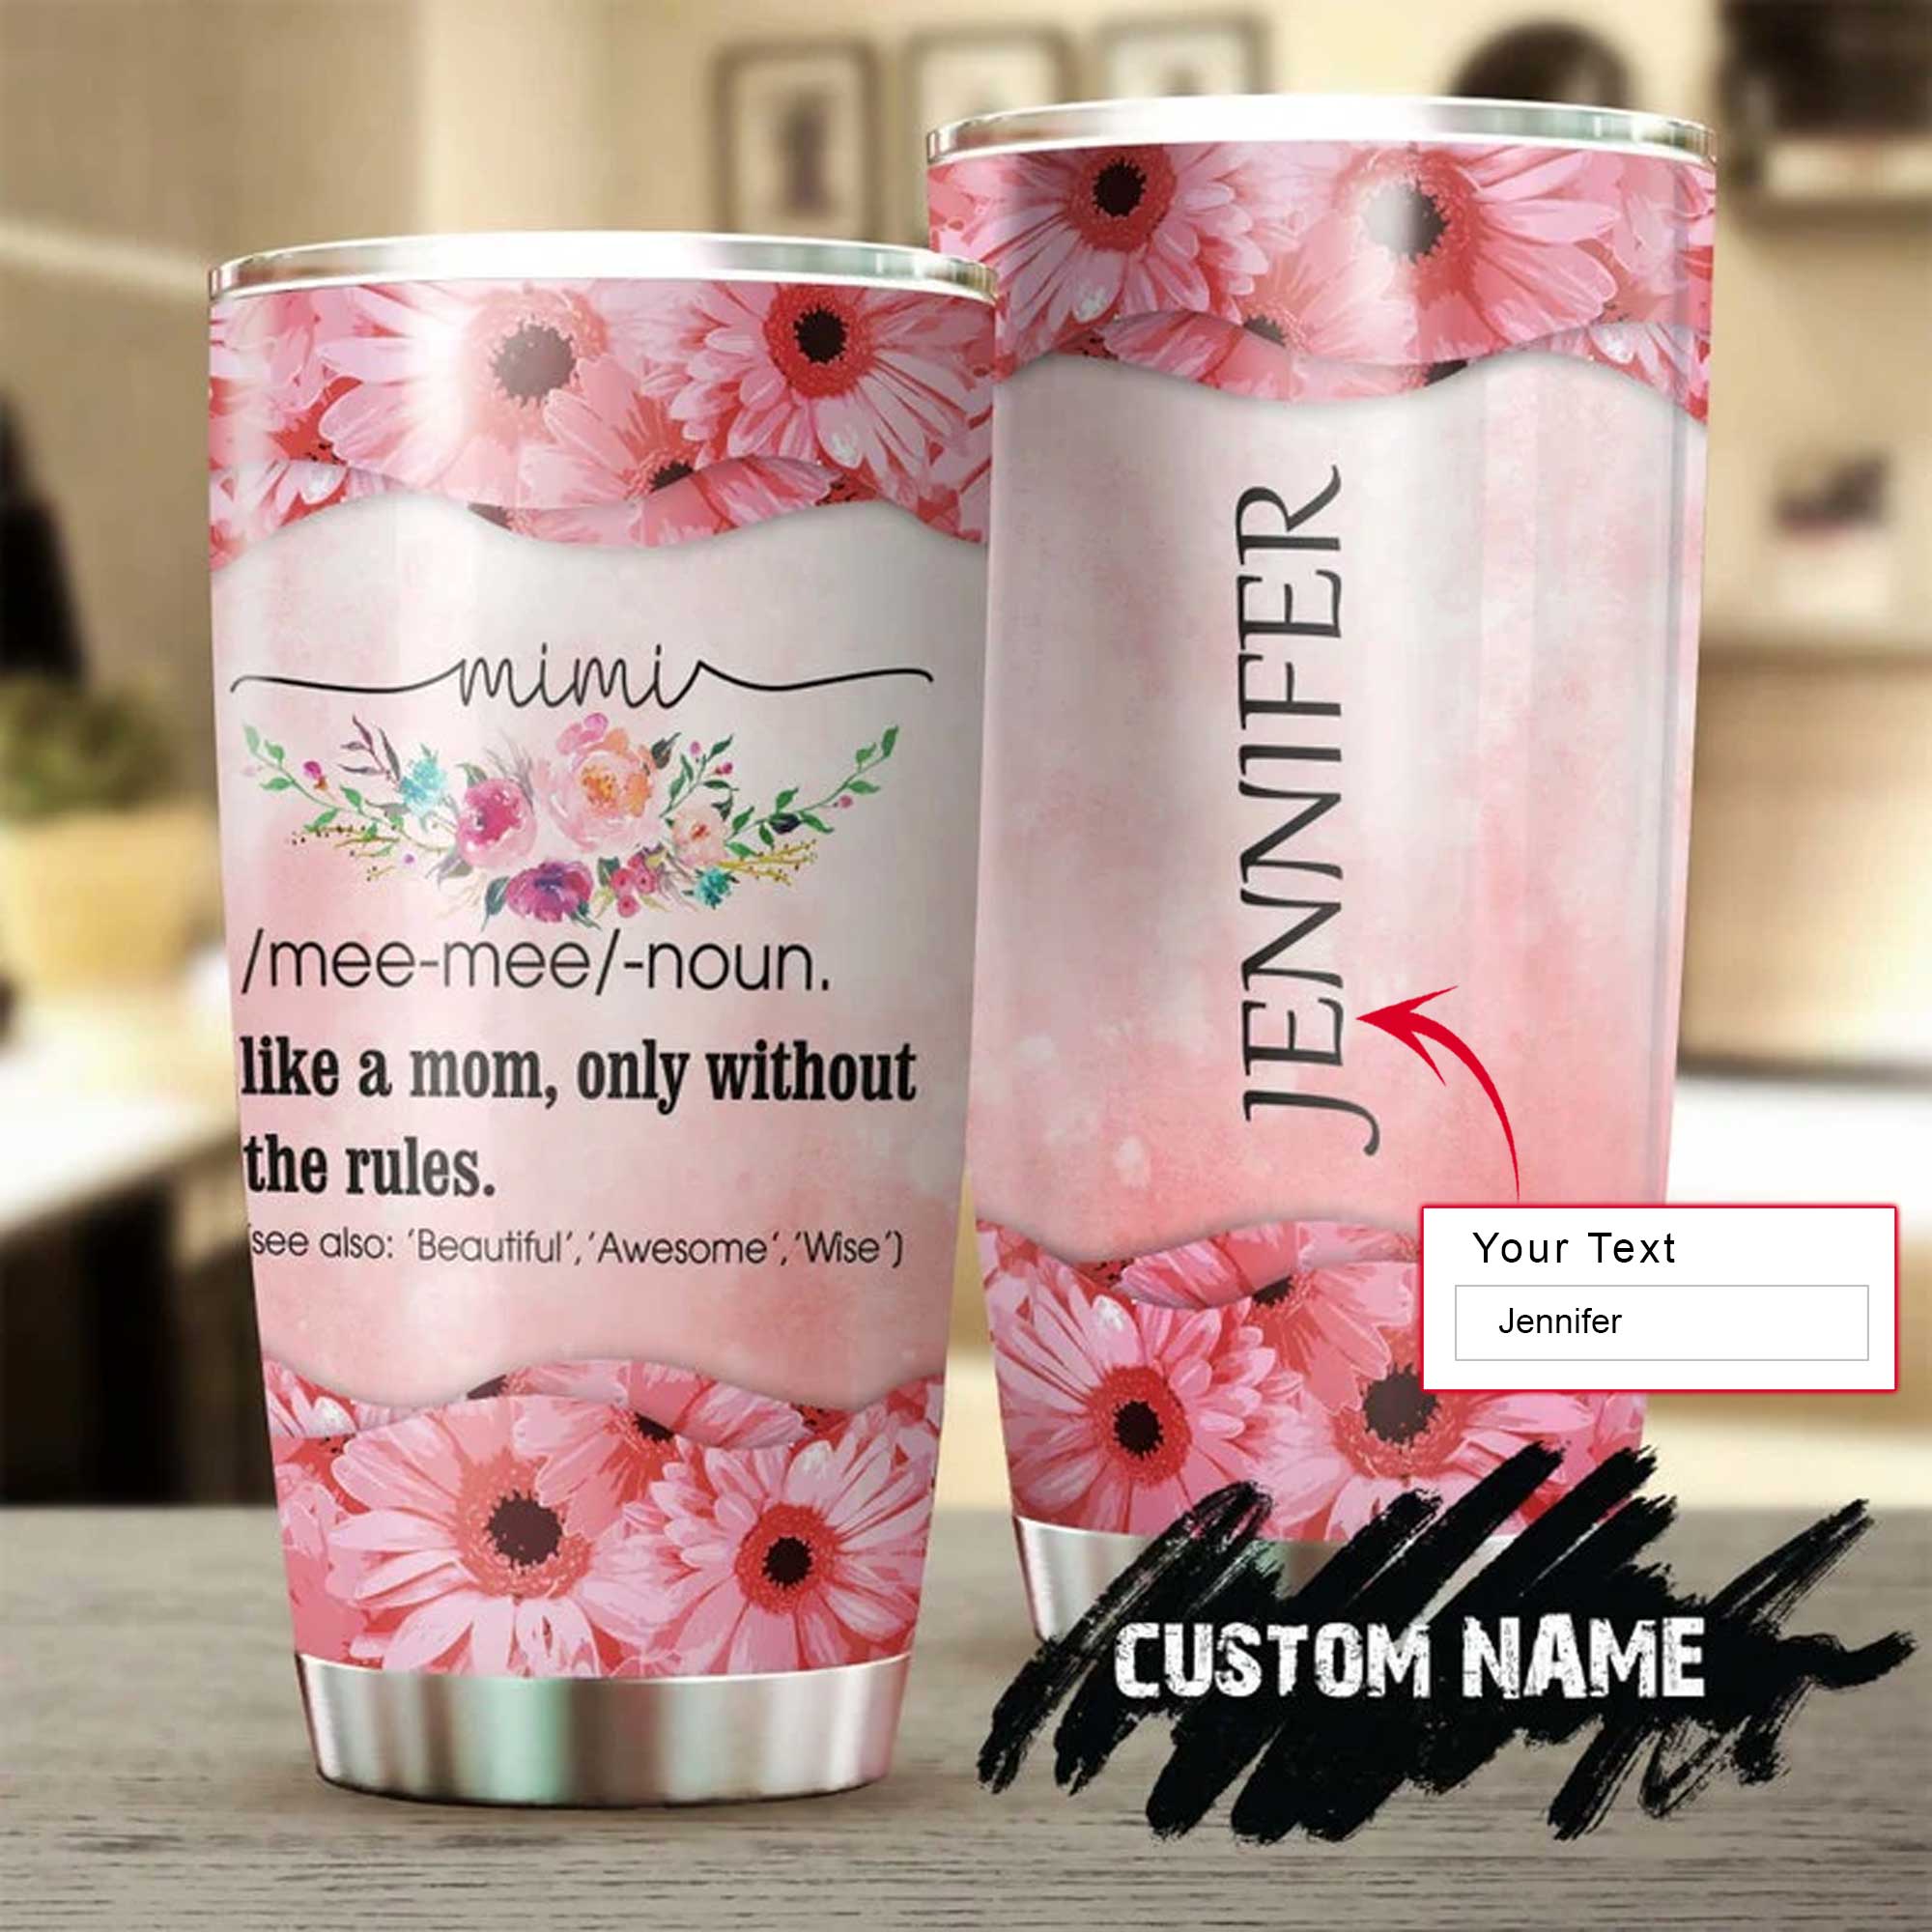 Personalized Mother's Day Gift Tumbler - Custom Gift For Mother's Day, Presents For Mom From Daughter Son - Mimi Like Normal Mom Without Rules Tumbler